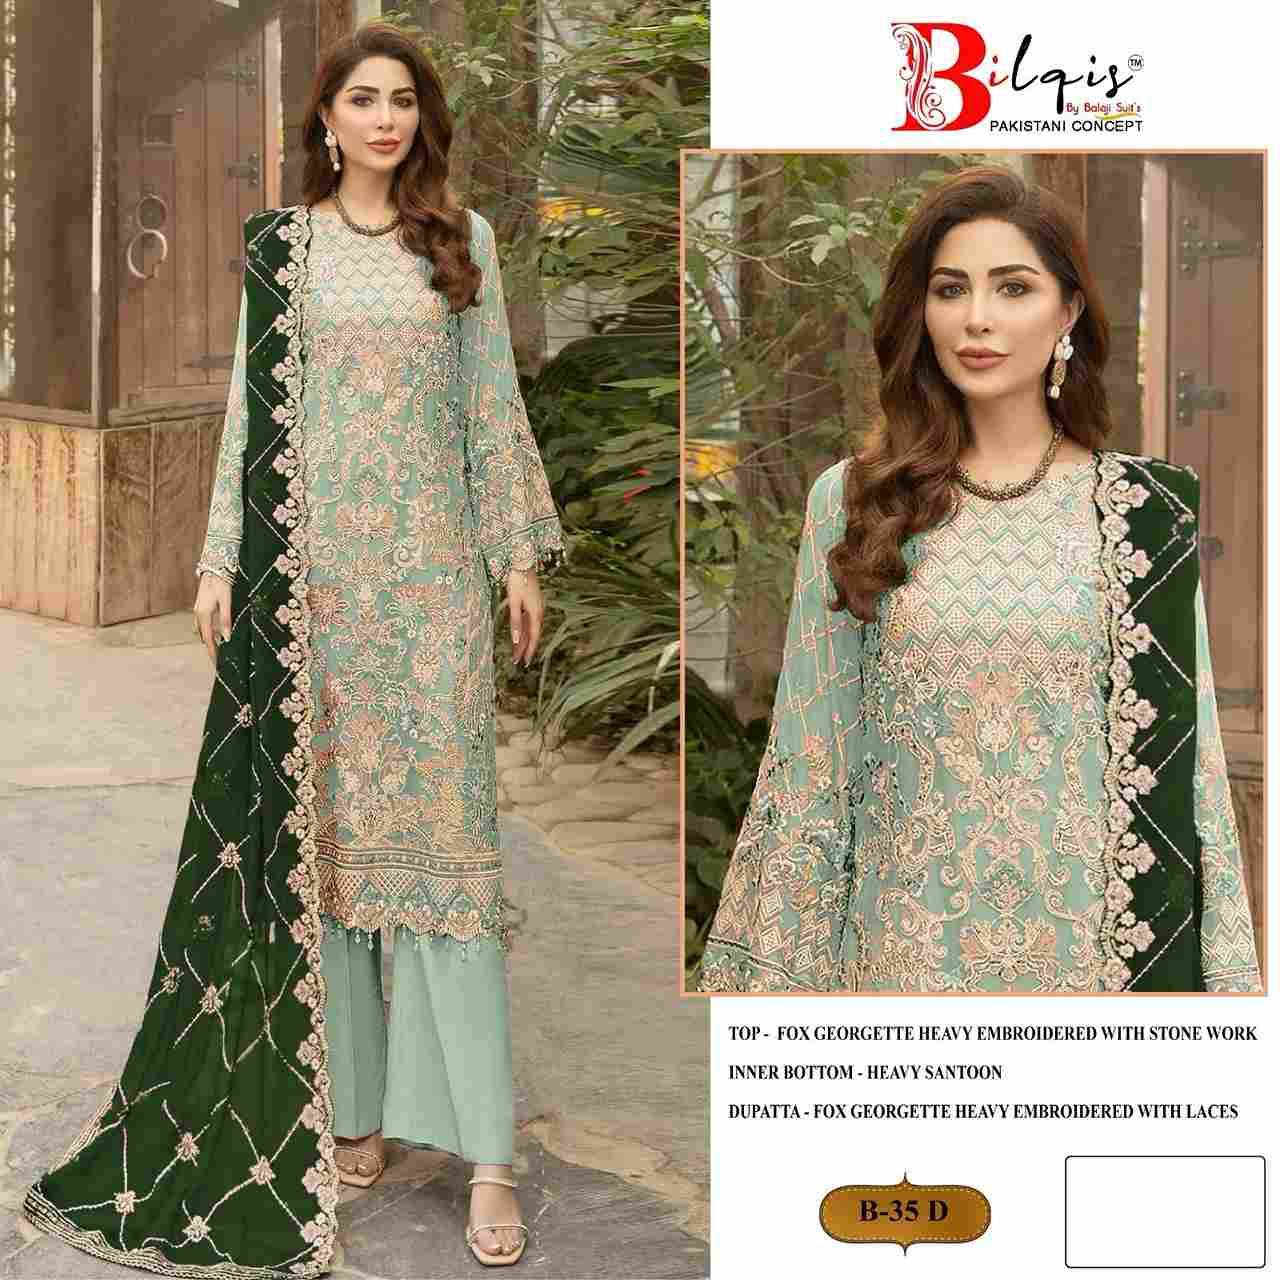 Bilqis 35 Colours By Bilqis 35-A To 35-D Series Beautiful Pakistani Suits Stylish Fancy Colorful Party Wear & Occasional Wear Faux Georgette Embroidery Dresses At Wholesale Price